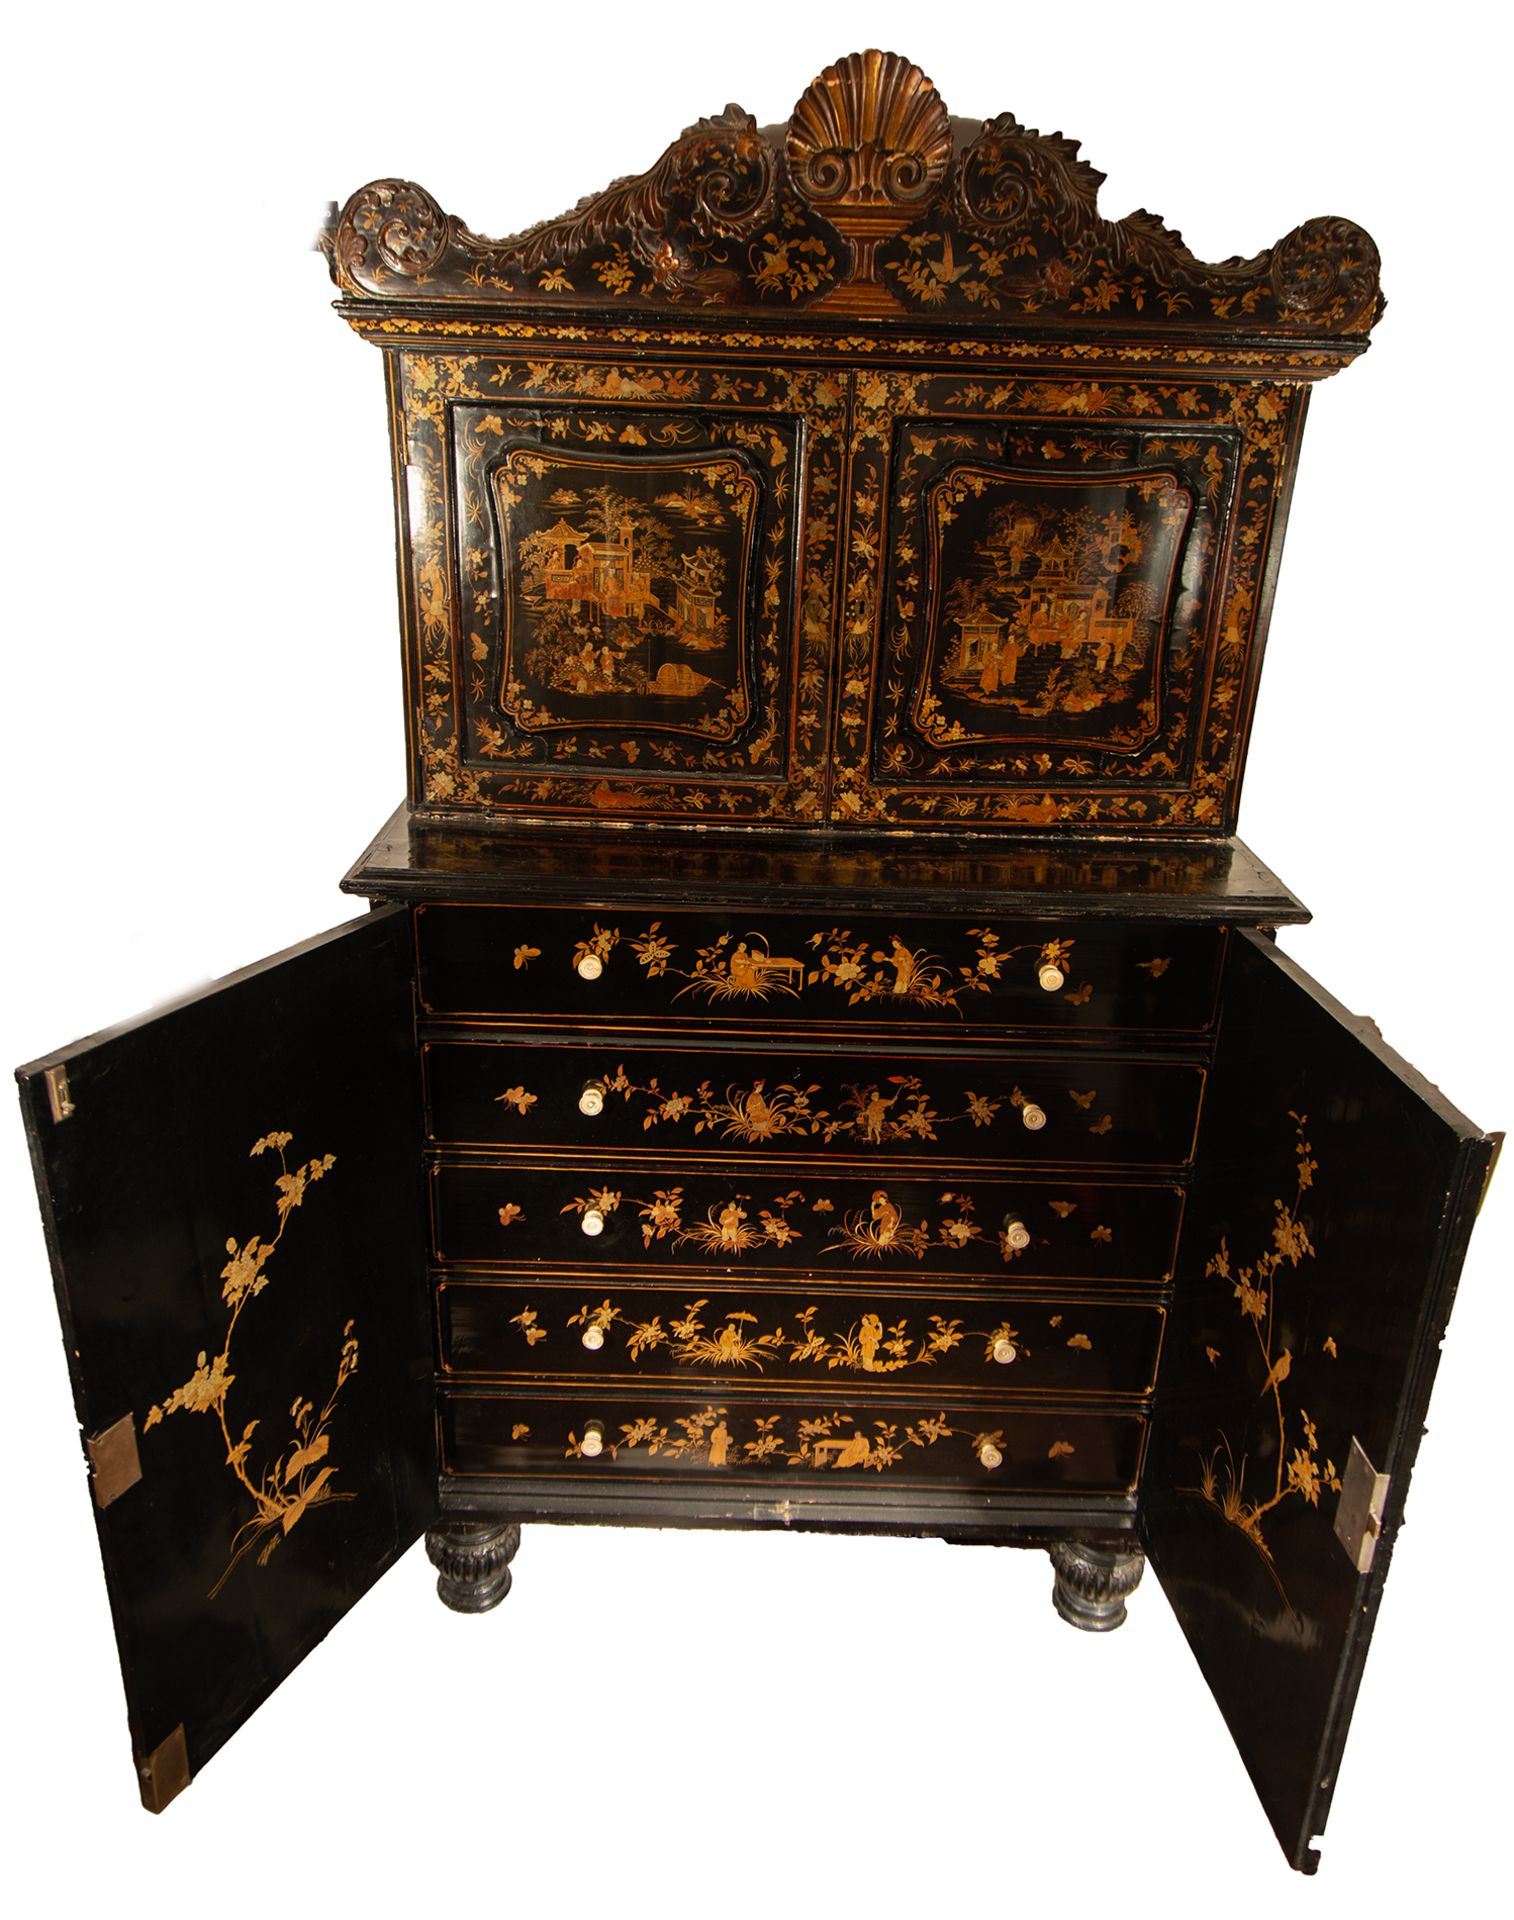 Important Cantonese Commode in lacquered, gilt and polychrome wood, Cantonese work for export, China - Image 4 of 13